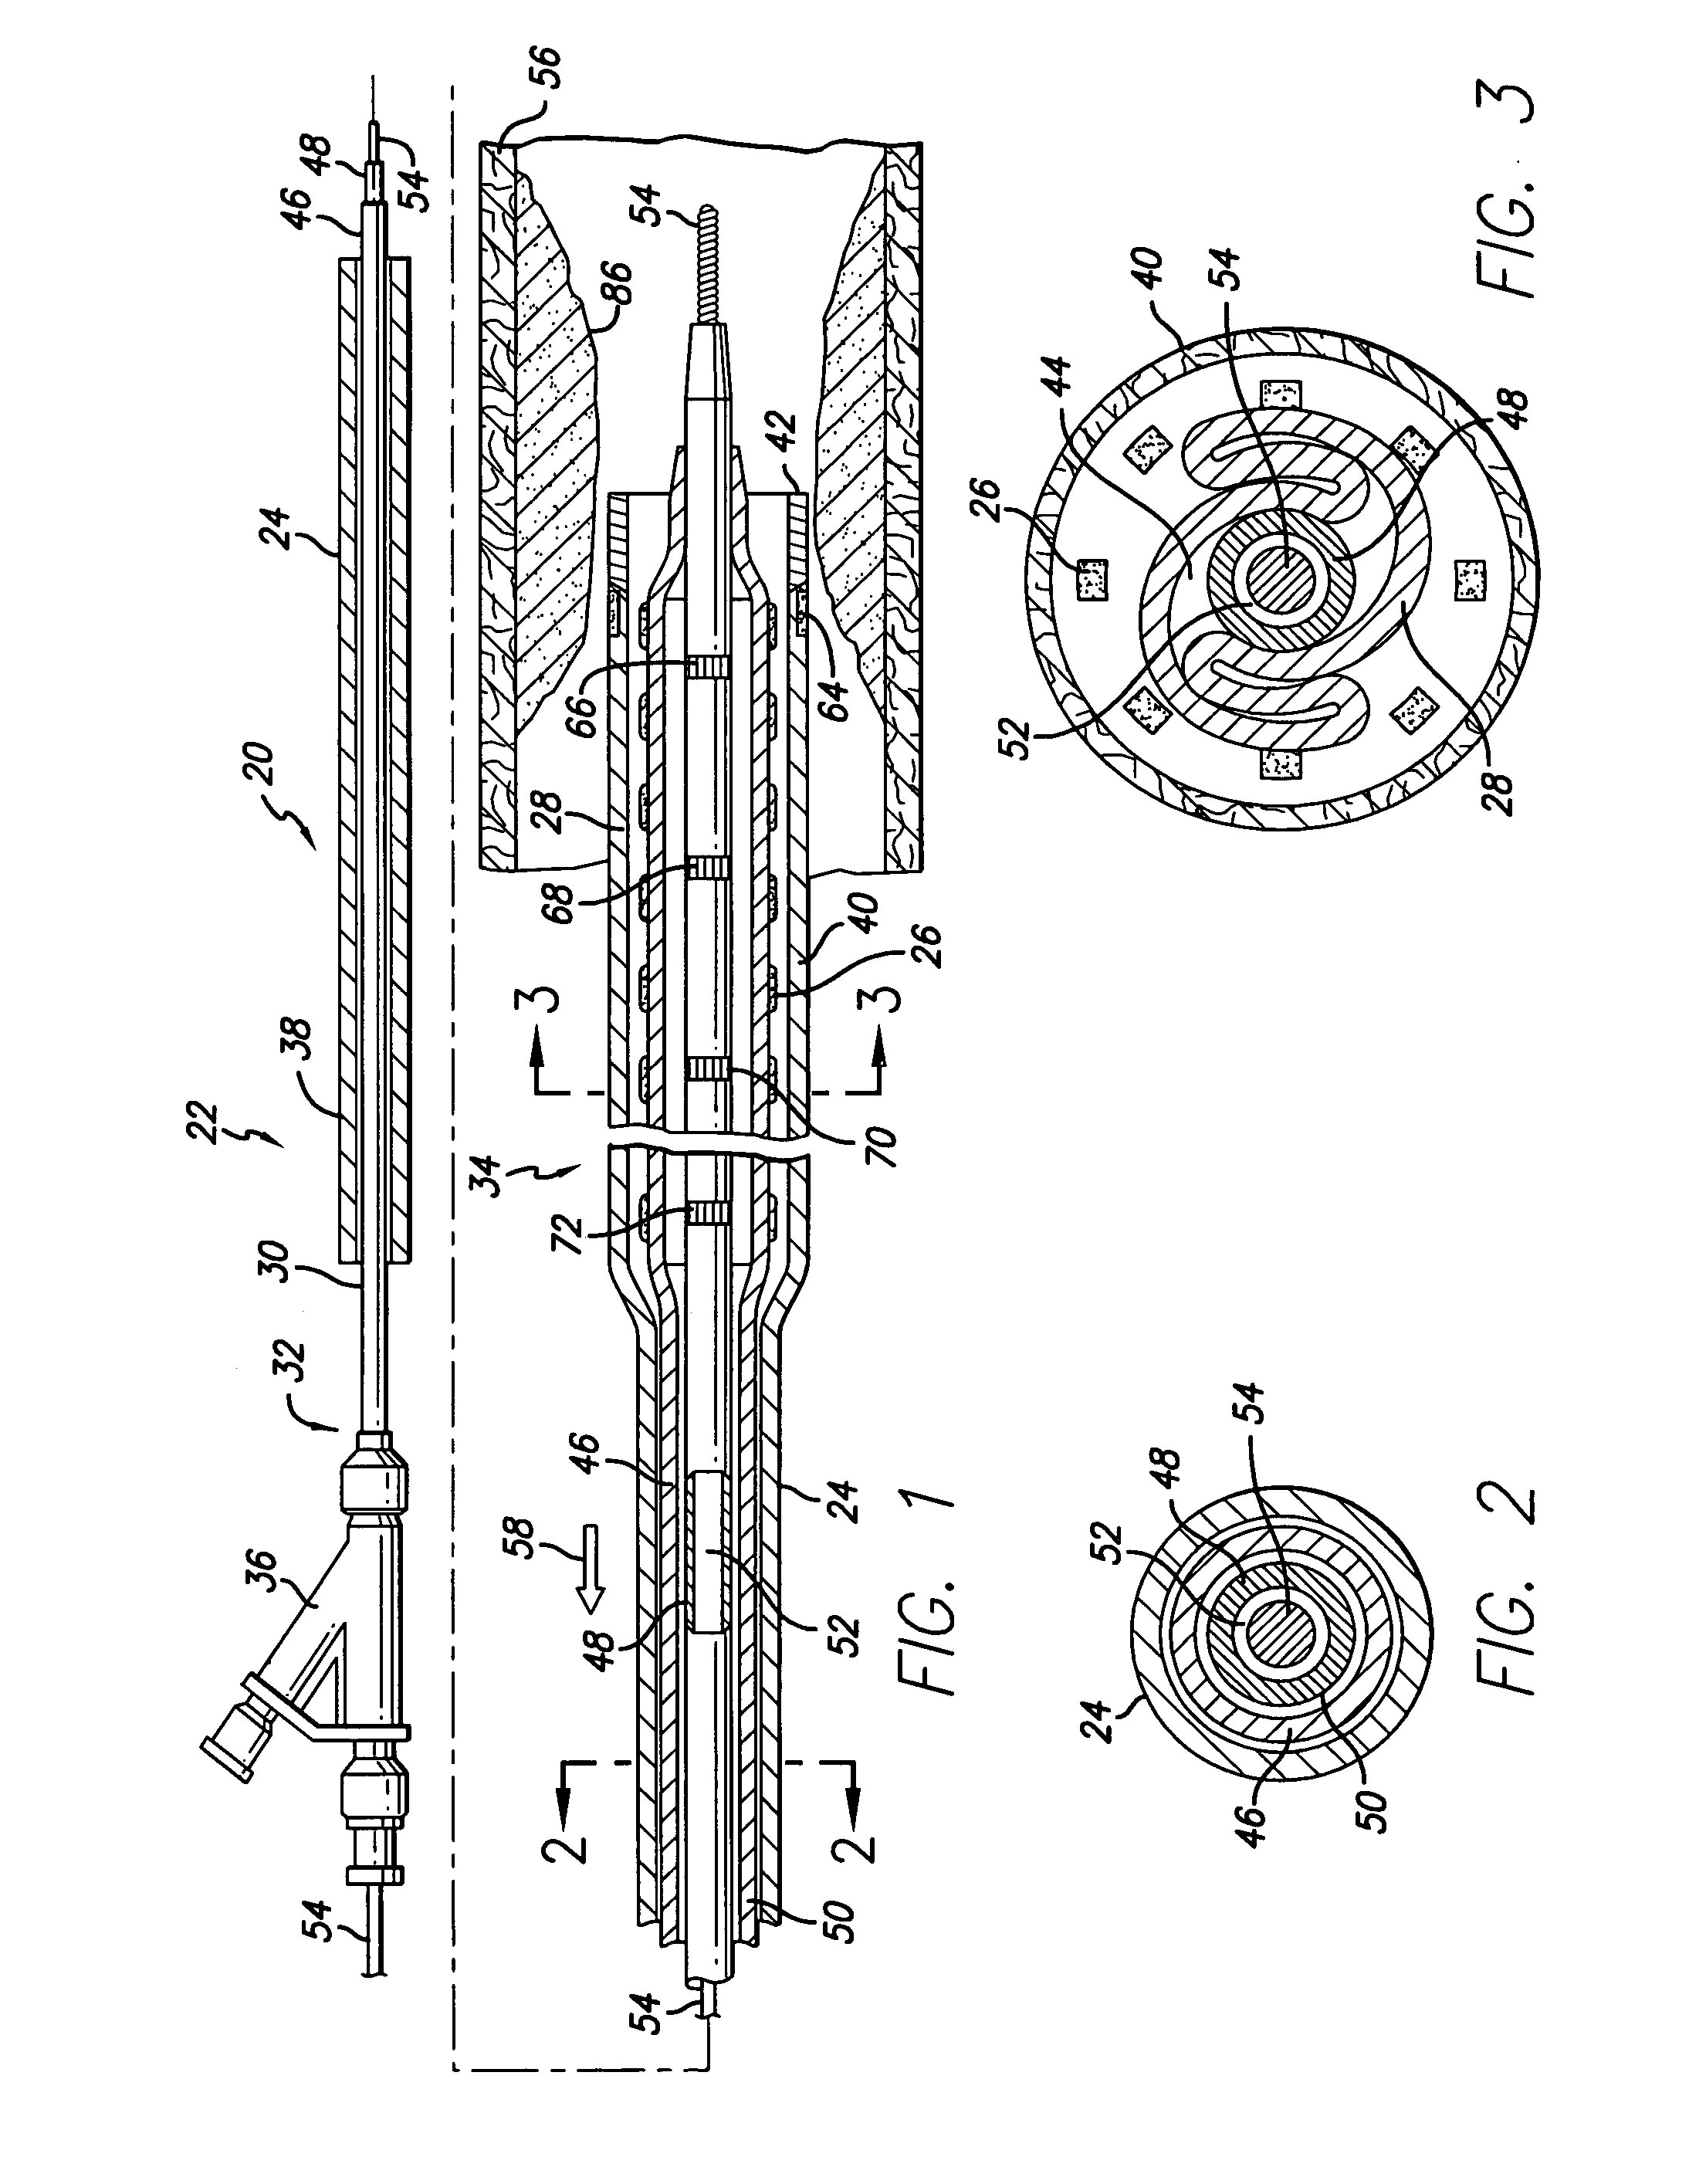 Stent delivery system with adjustable length balloon